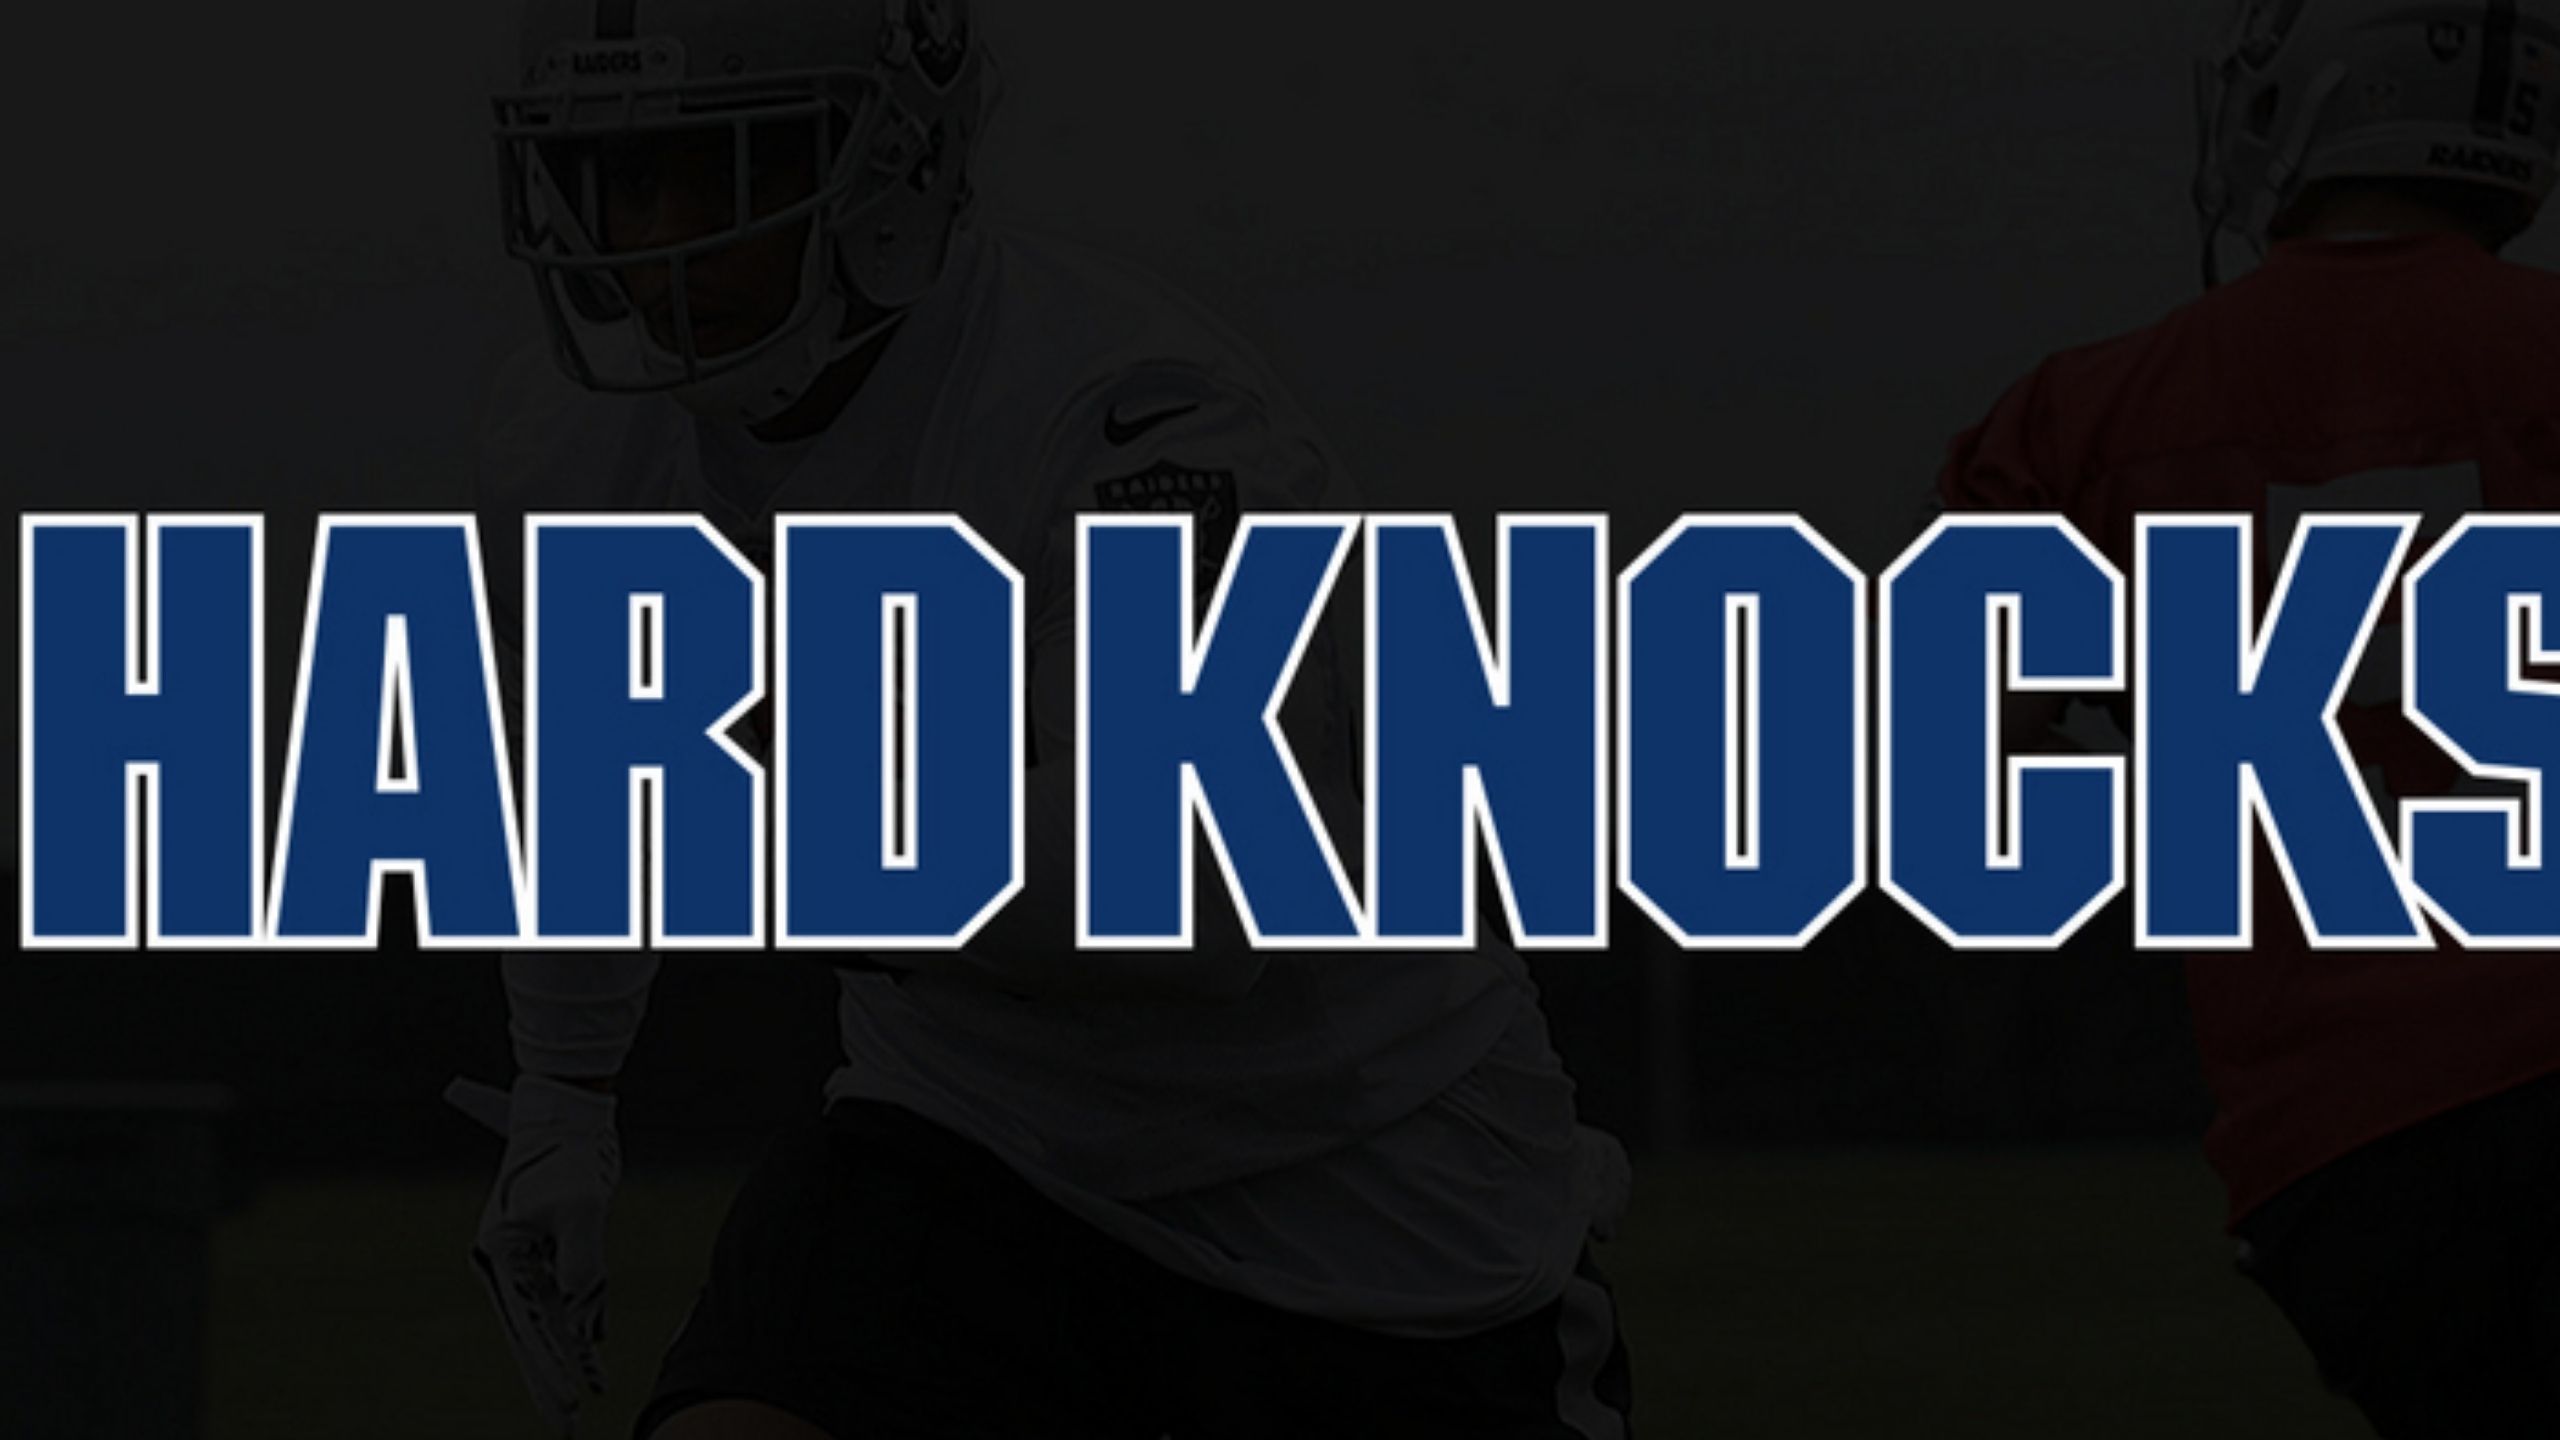 How to Watch Hard Knocks Without HBO [Guide]